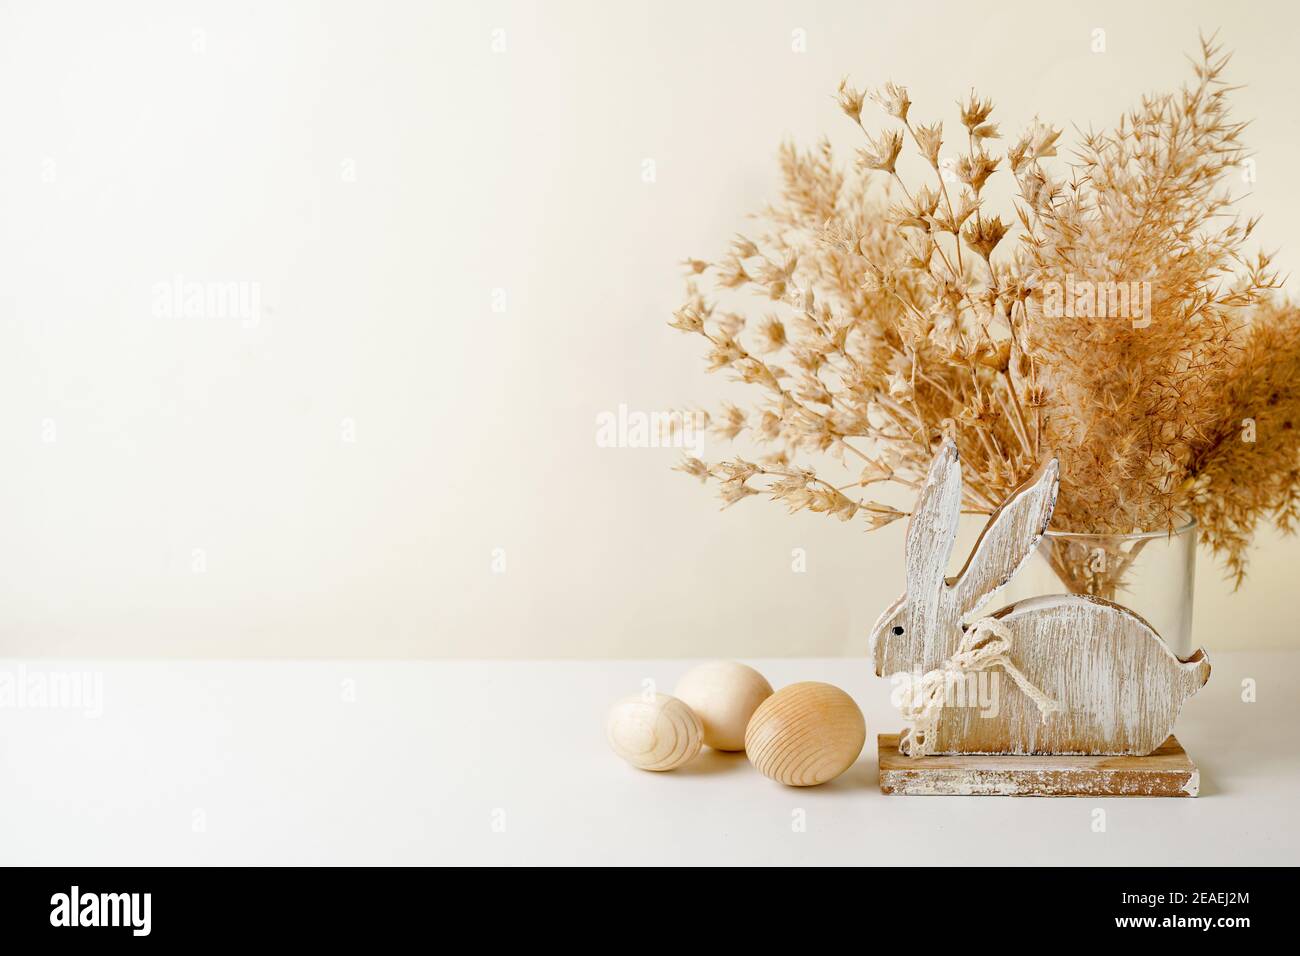 Rustic Easter Decorations with wooden rabbit, eggs and pampas grass, copy space Stock Photo